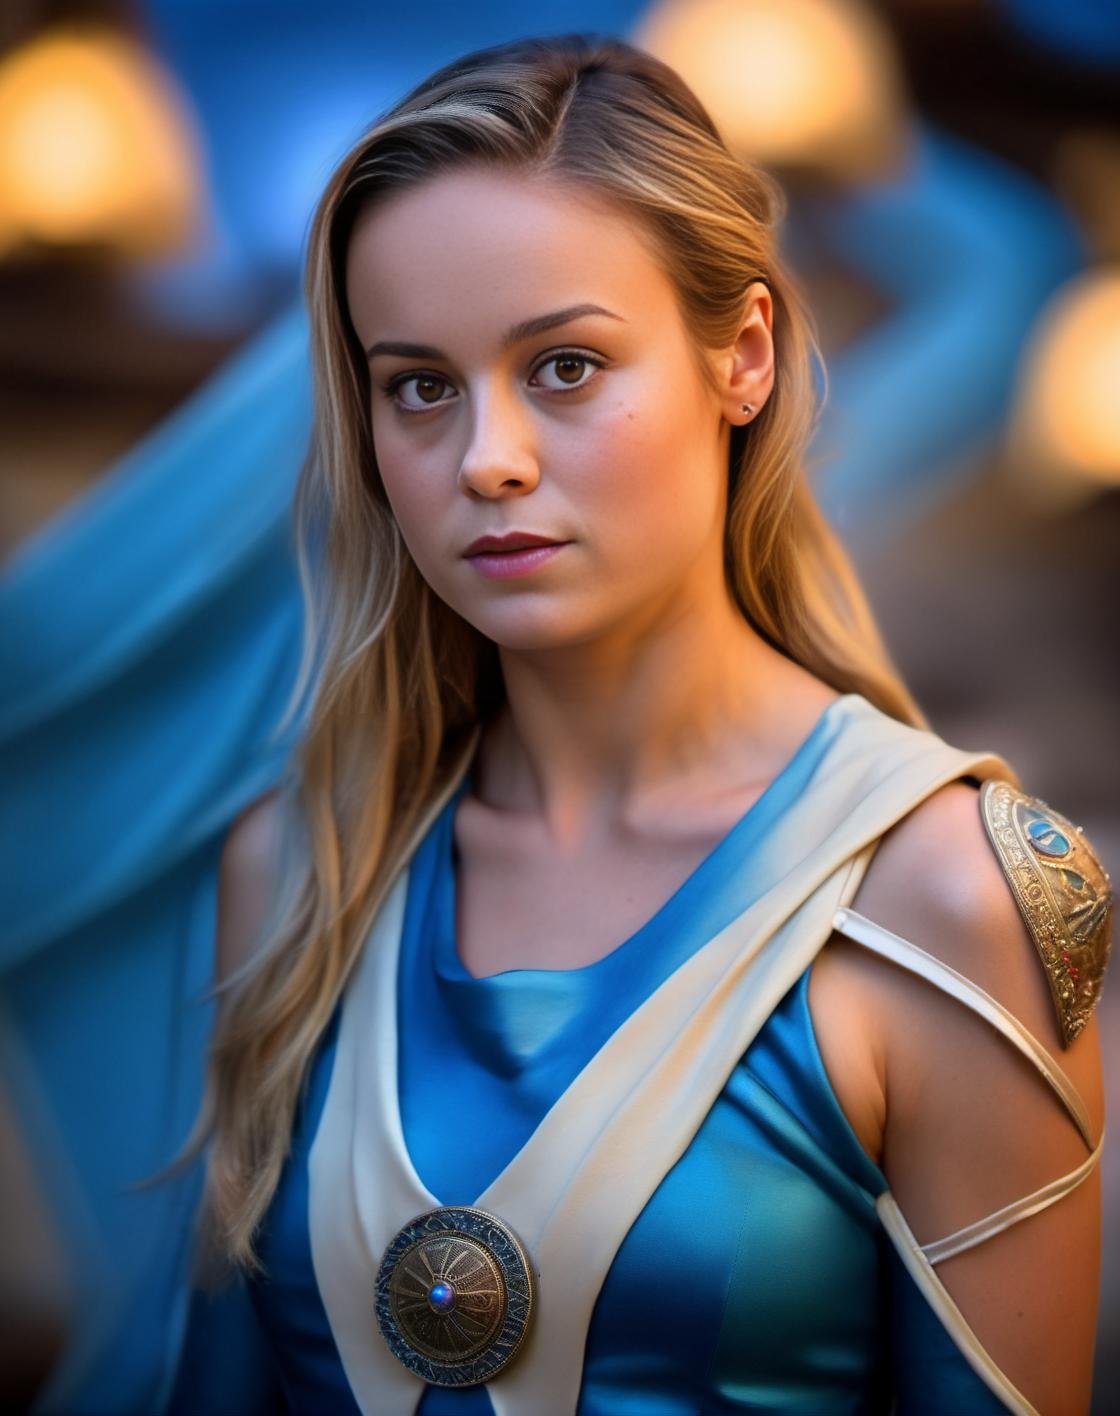 BrieLarson, photograph, Mannerism Art, Adorable Syrian Female, wearing Labyrinthine costume, at Blue hour, Phase One XF IQ4 150MP, telephoto lens, Muted Colors, League of Legends Splash Art, art by Alberto Magnelli,art by Don Bergland,  <lora:BrieLarsonSDXL:1>